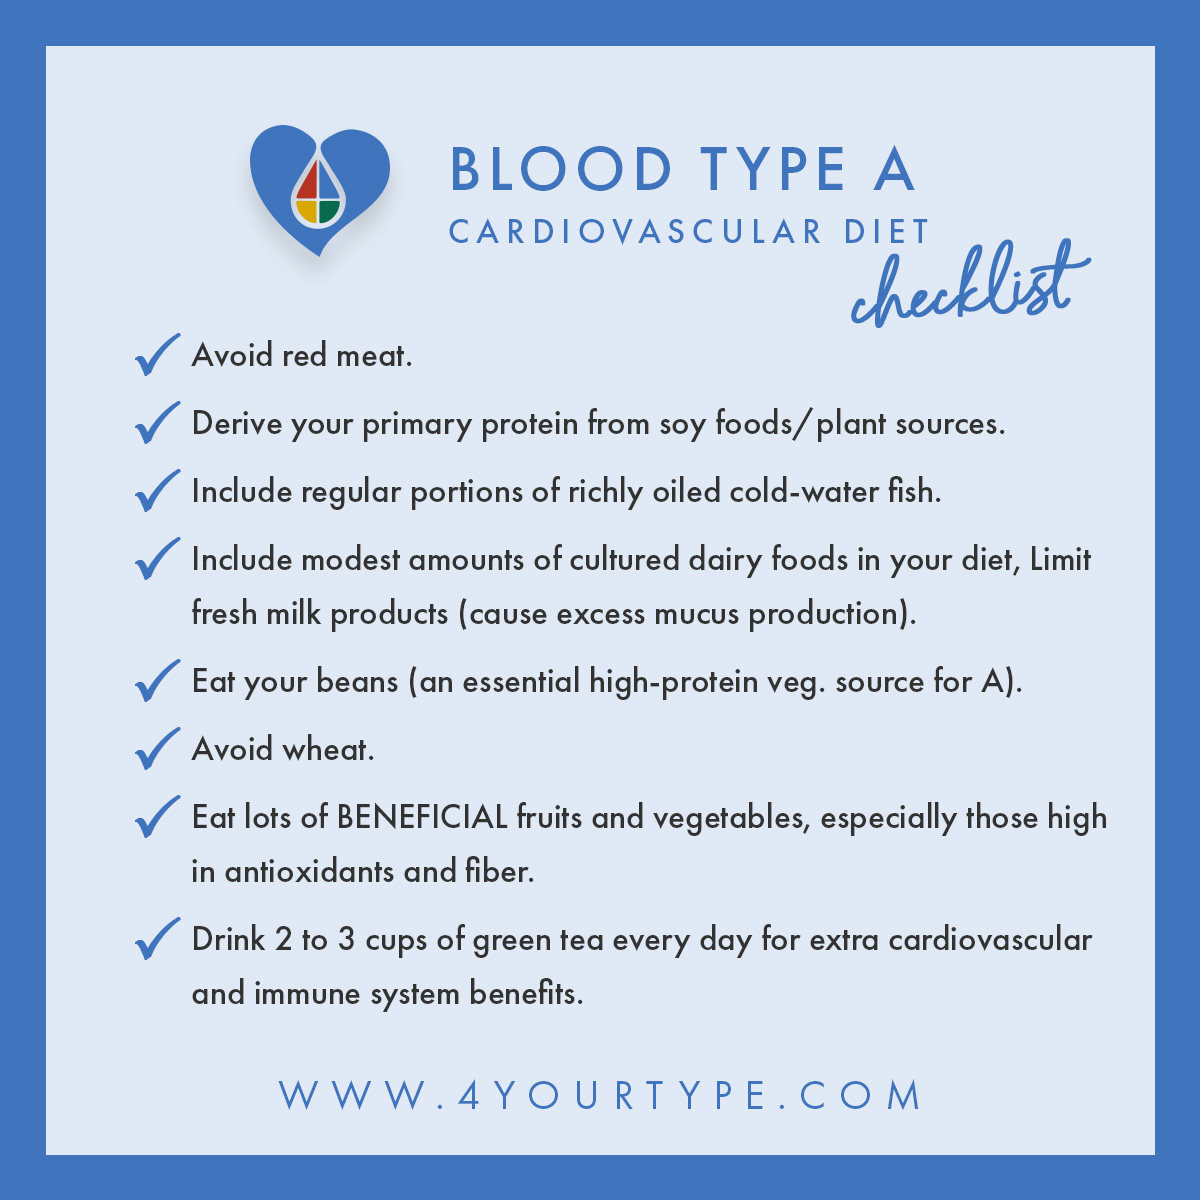 Heart healthy foods blood type checklist A